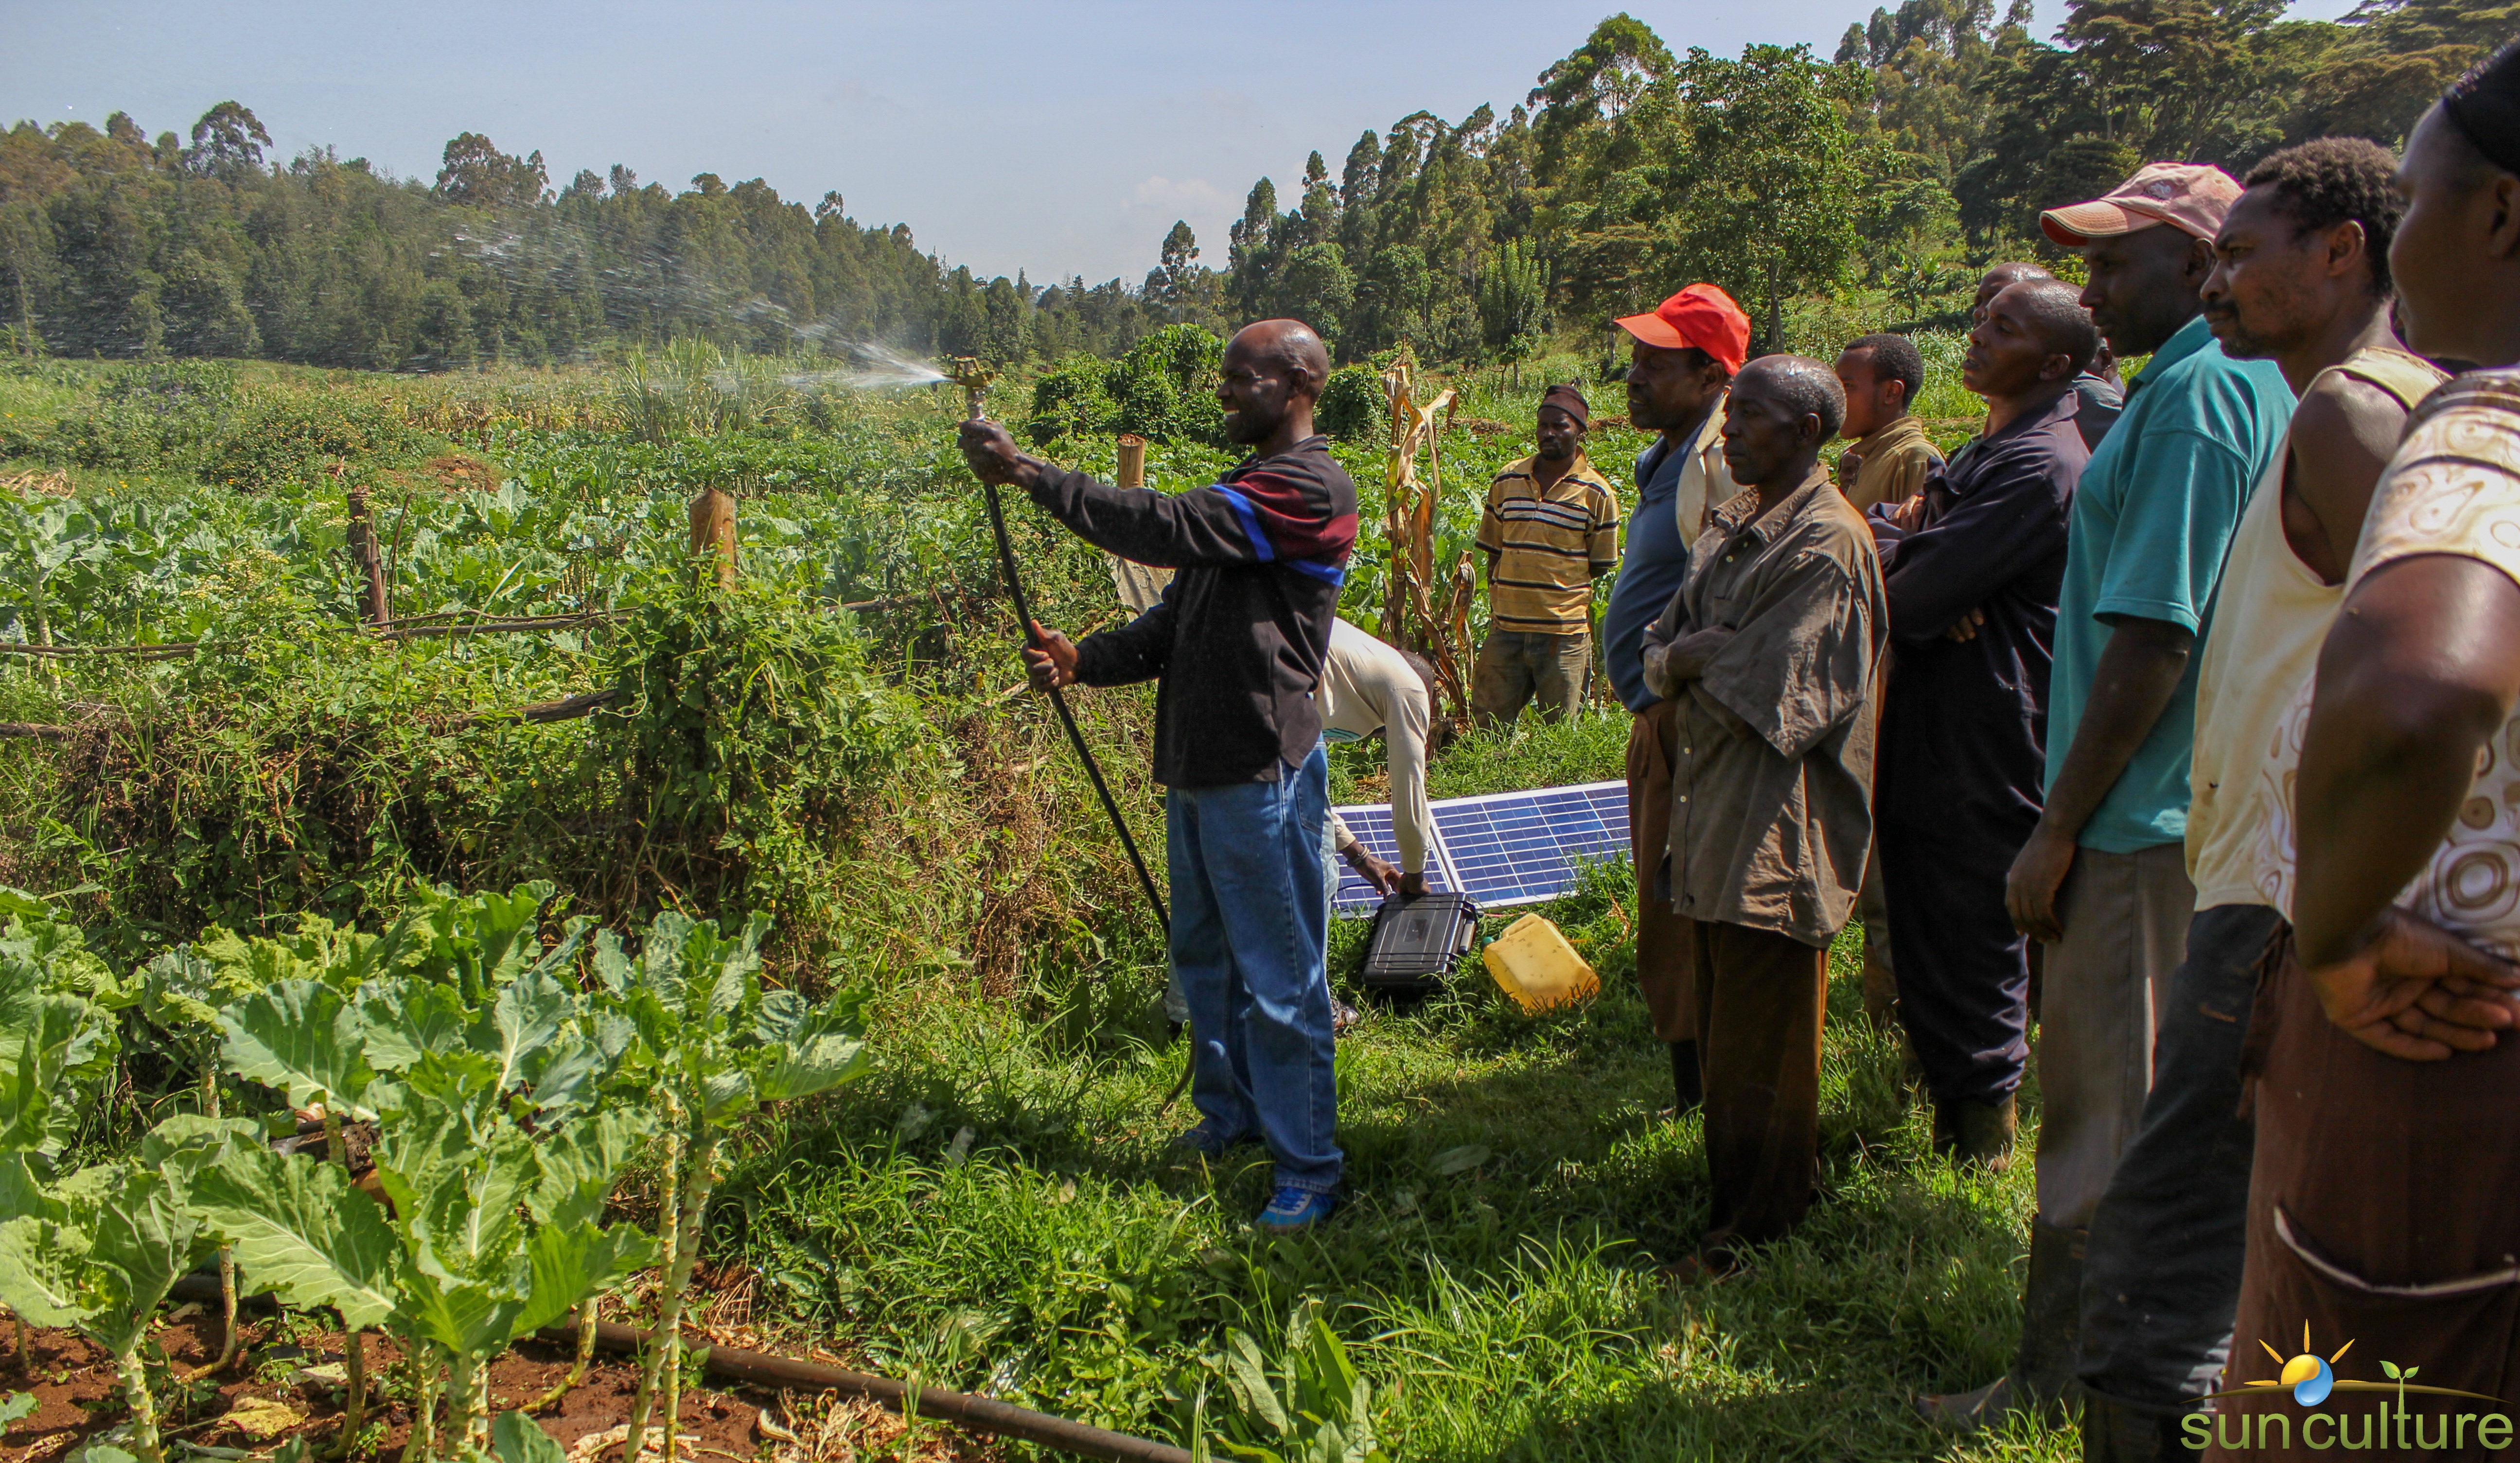 African man showing group a oslar powered irrigation system in the field